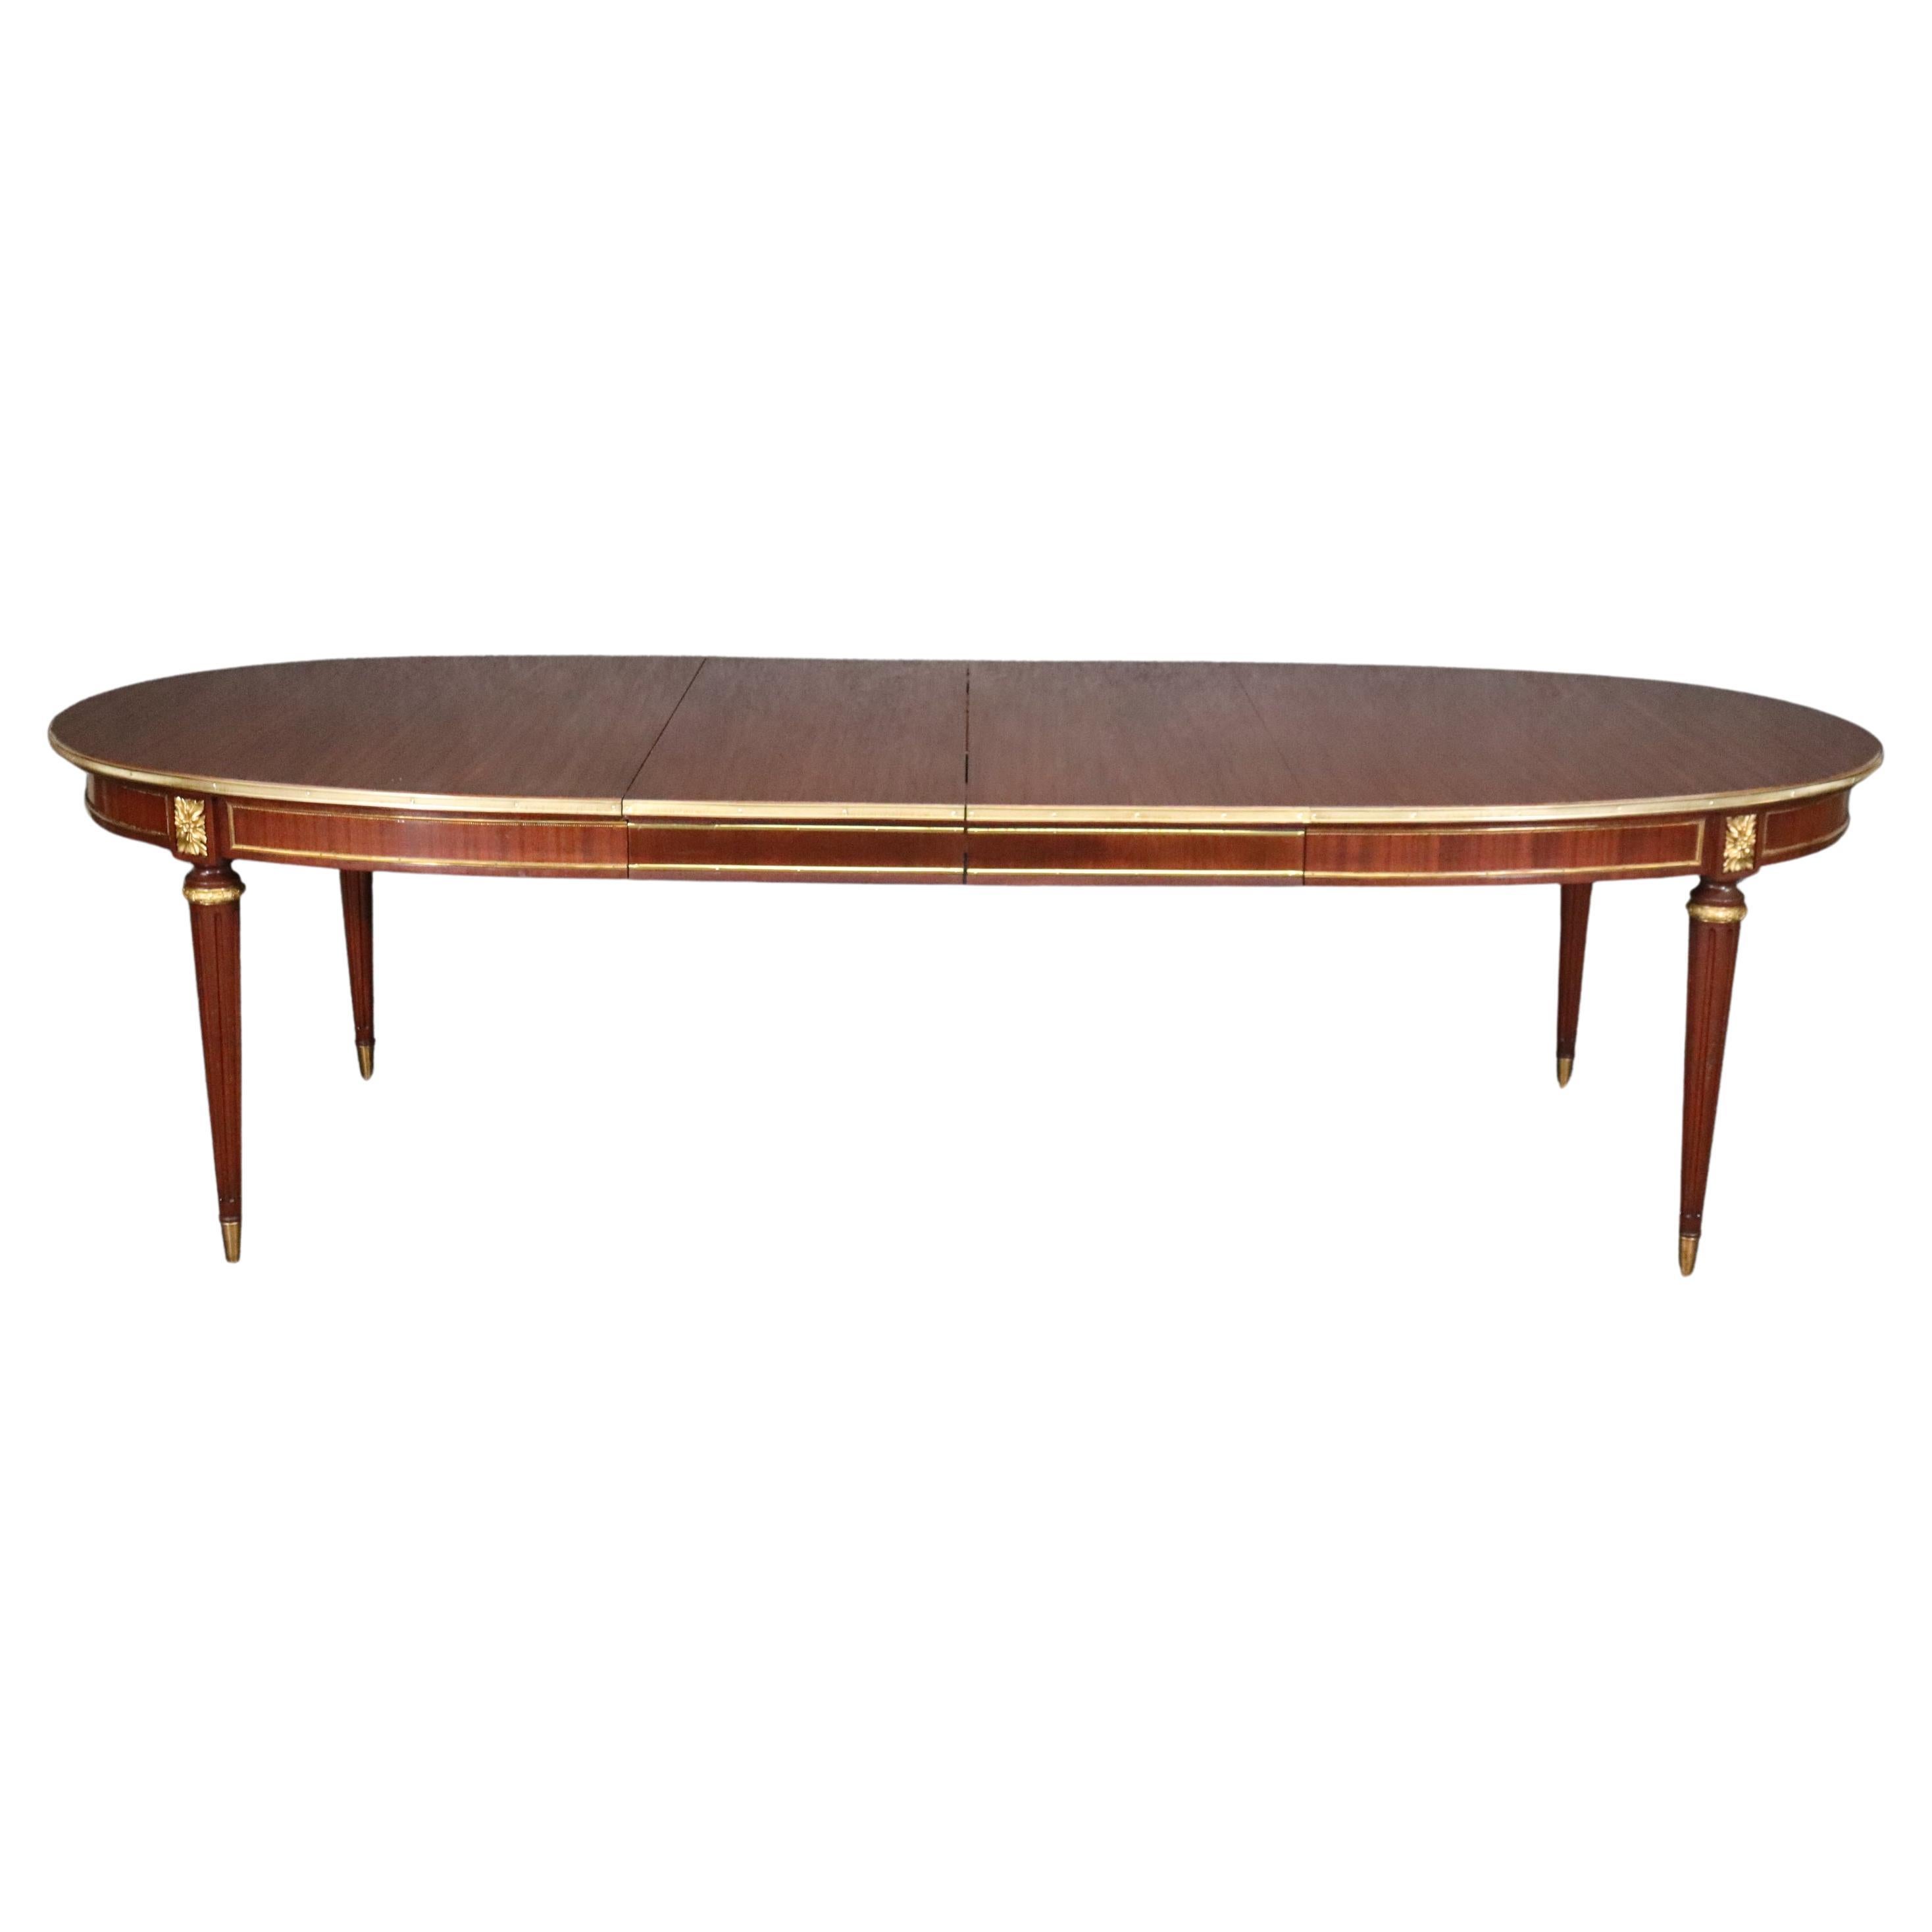 Maison Jansen Louis XVI Style Mahogany Dining Table With Two Leaves 